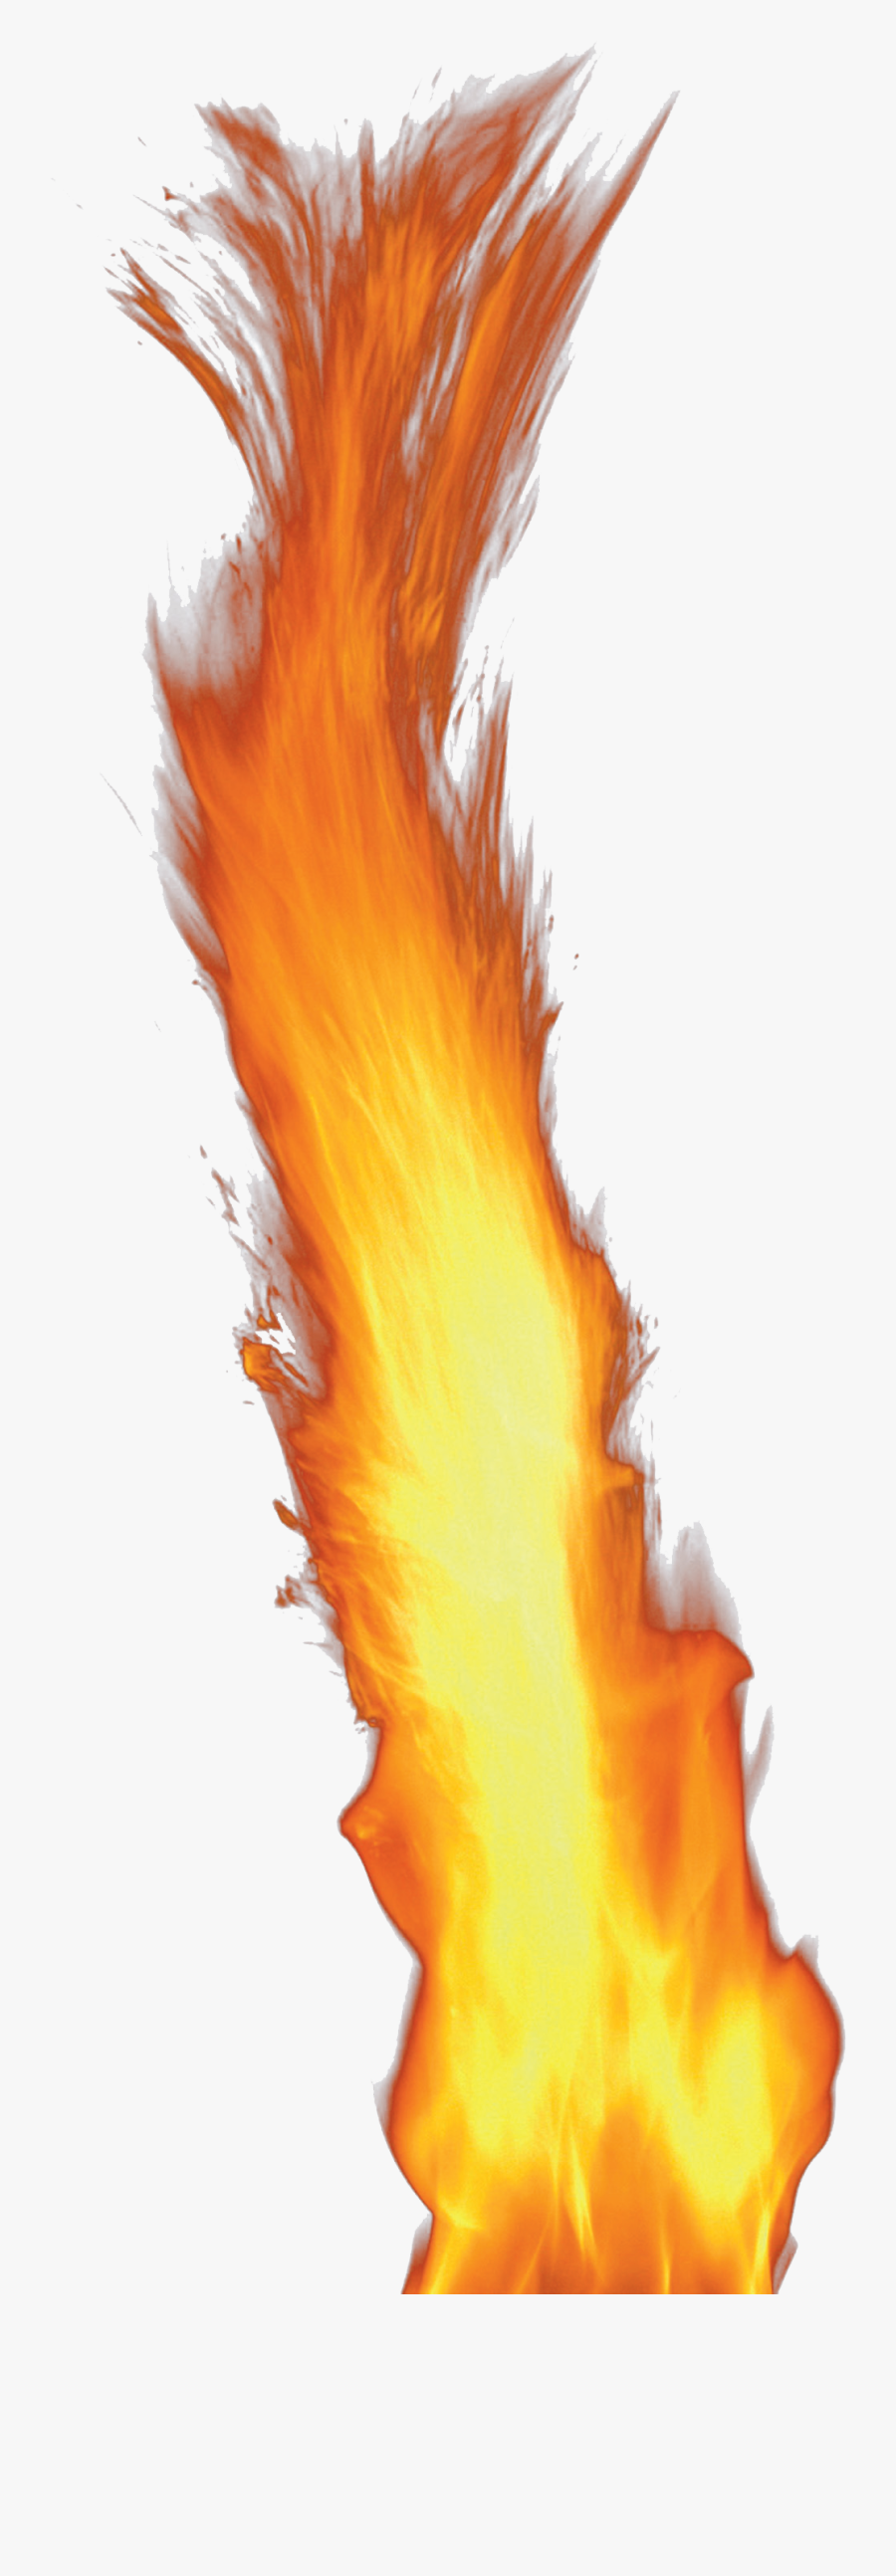 Realistic Fire Png - Flame Animated Gif Transparent Background, Transparent Clipart